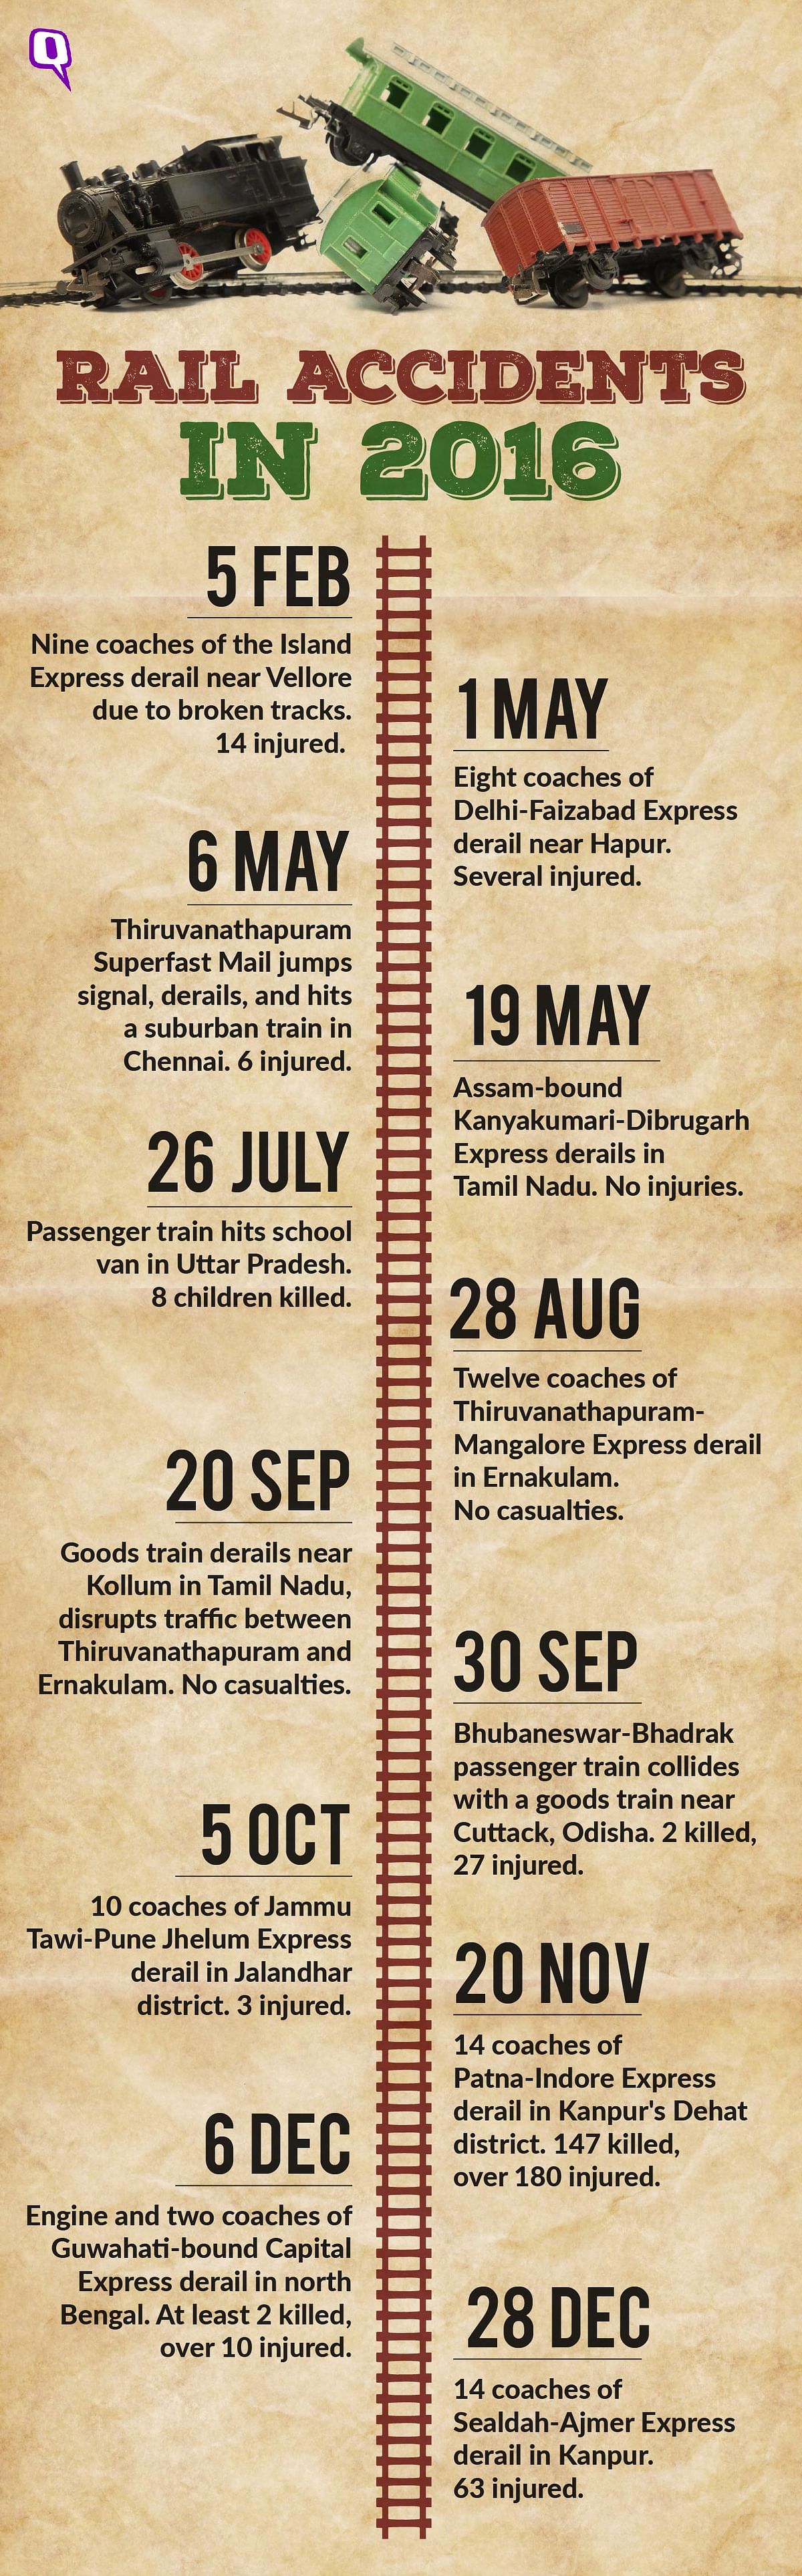 There have been eight major rail accidents in India in 2017 so far.